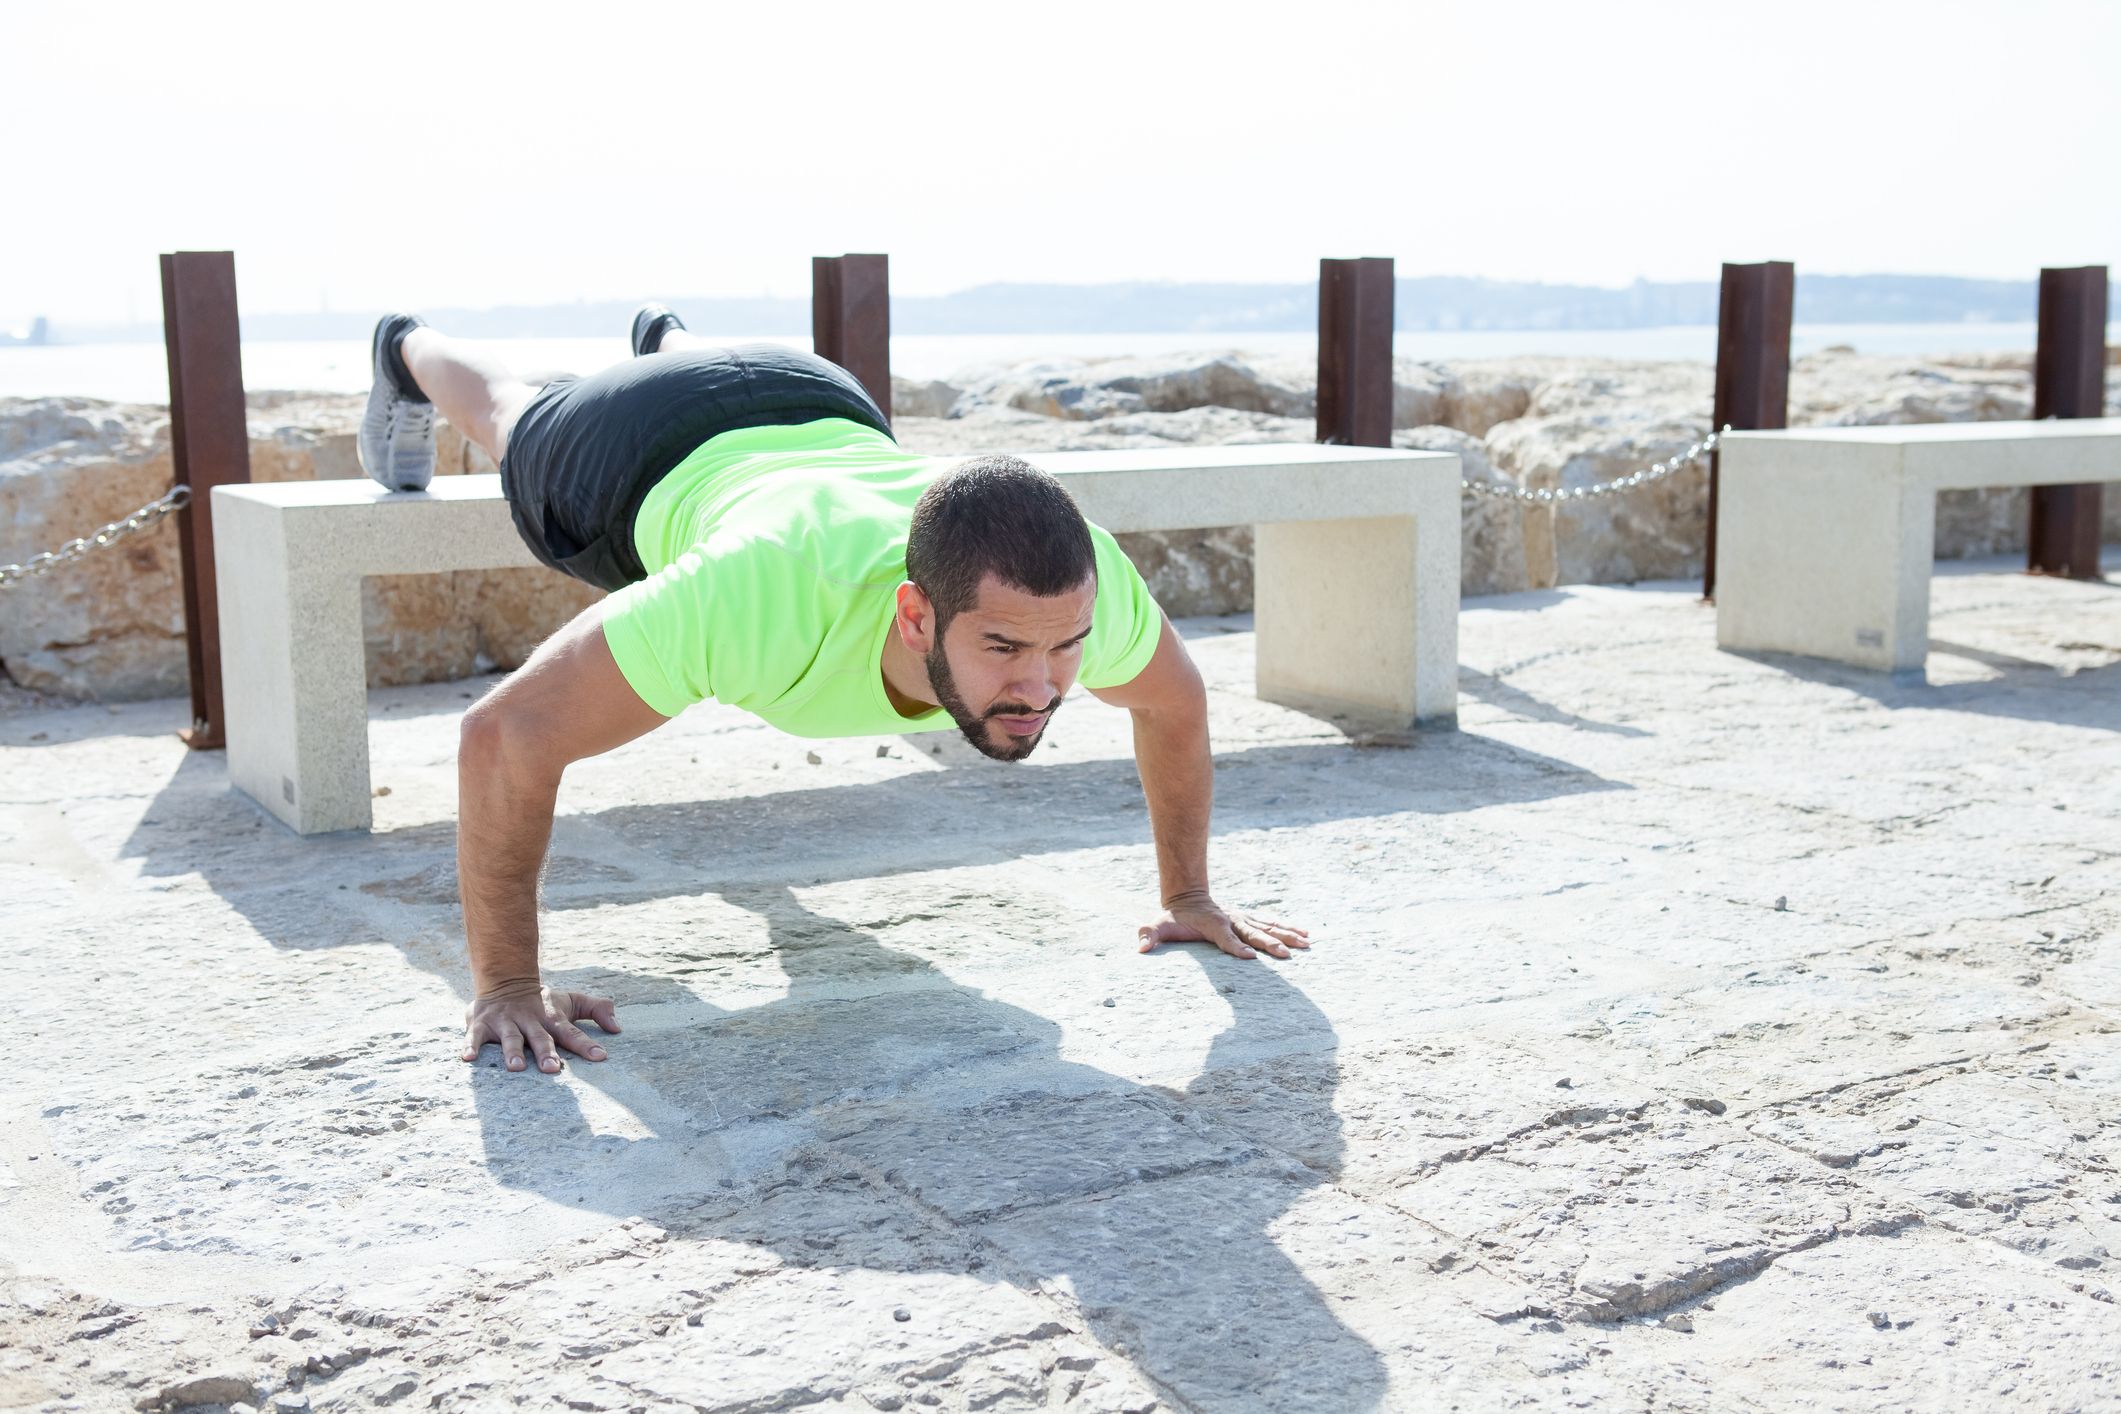 Reasons Push-Ups Are Hard and How to Get Stronger